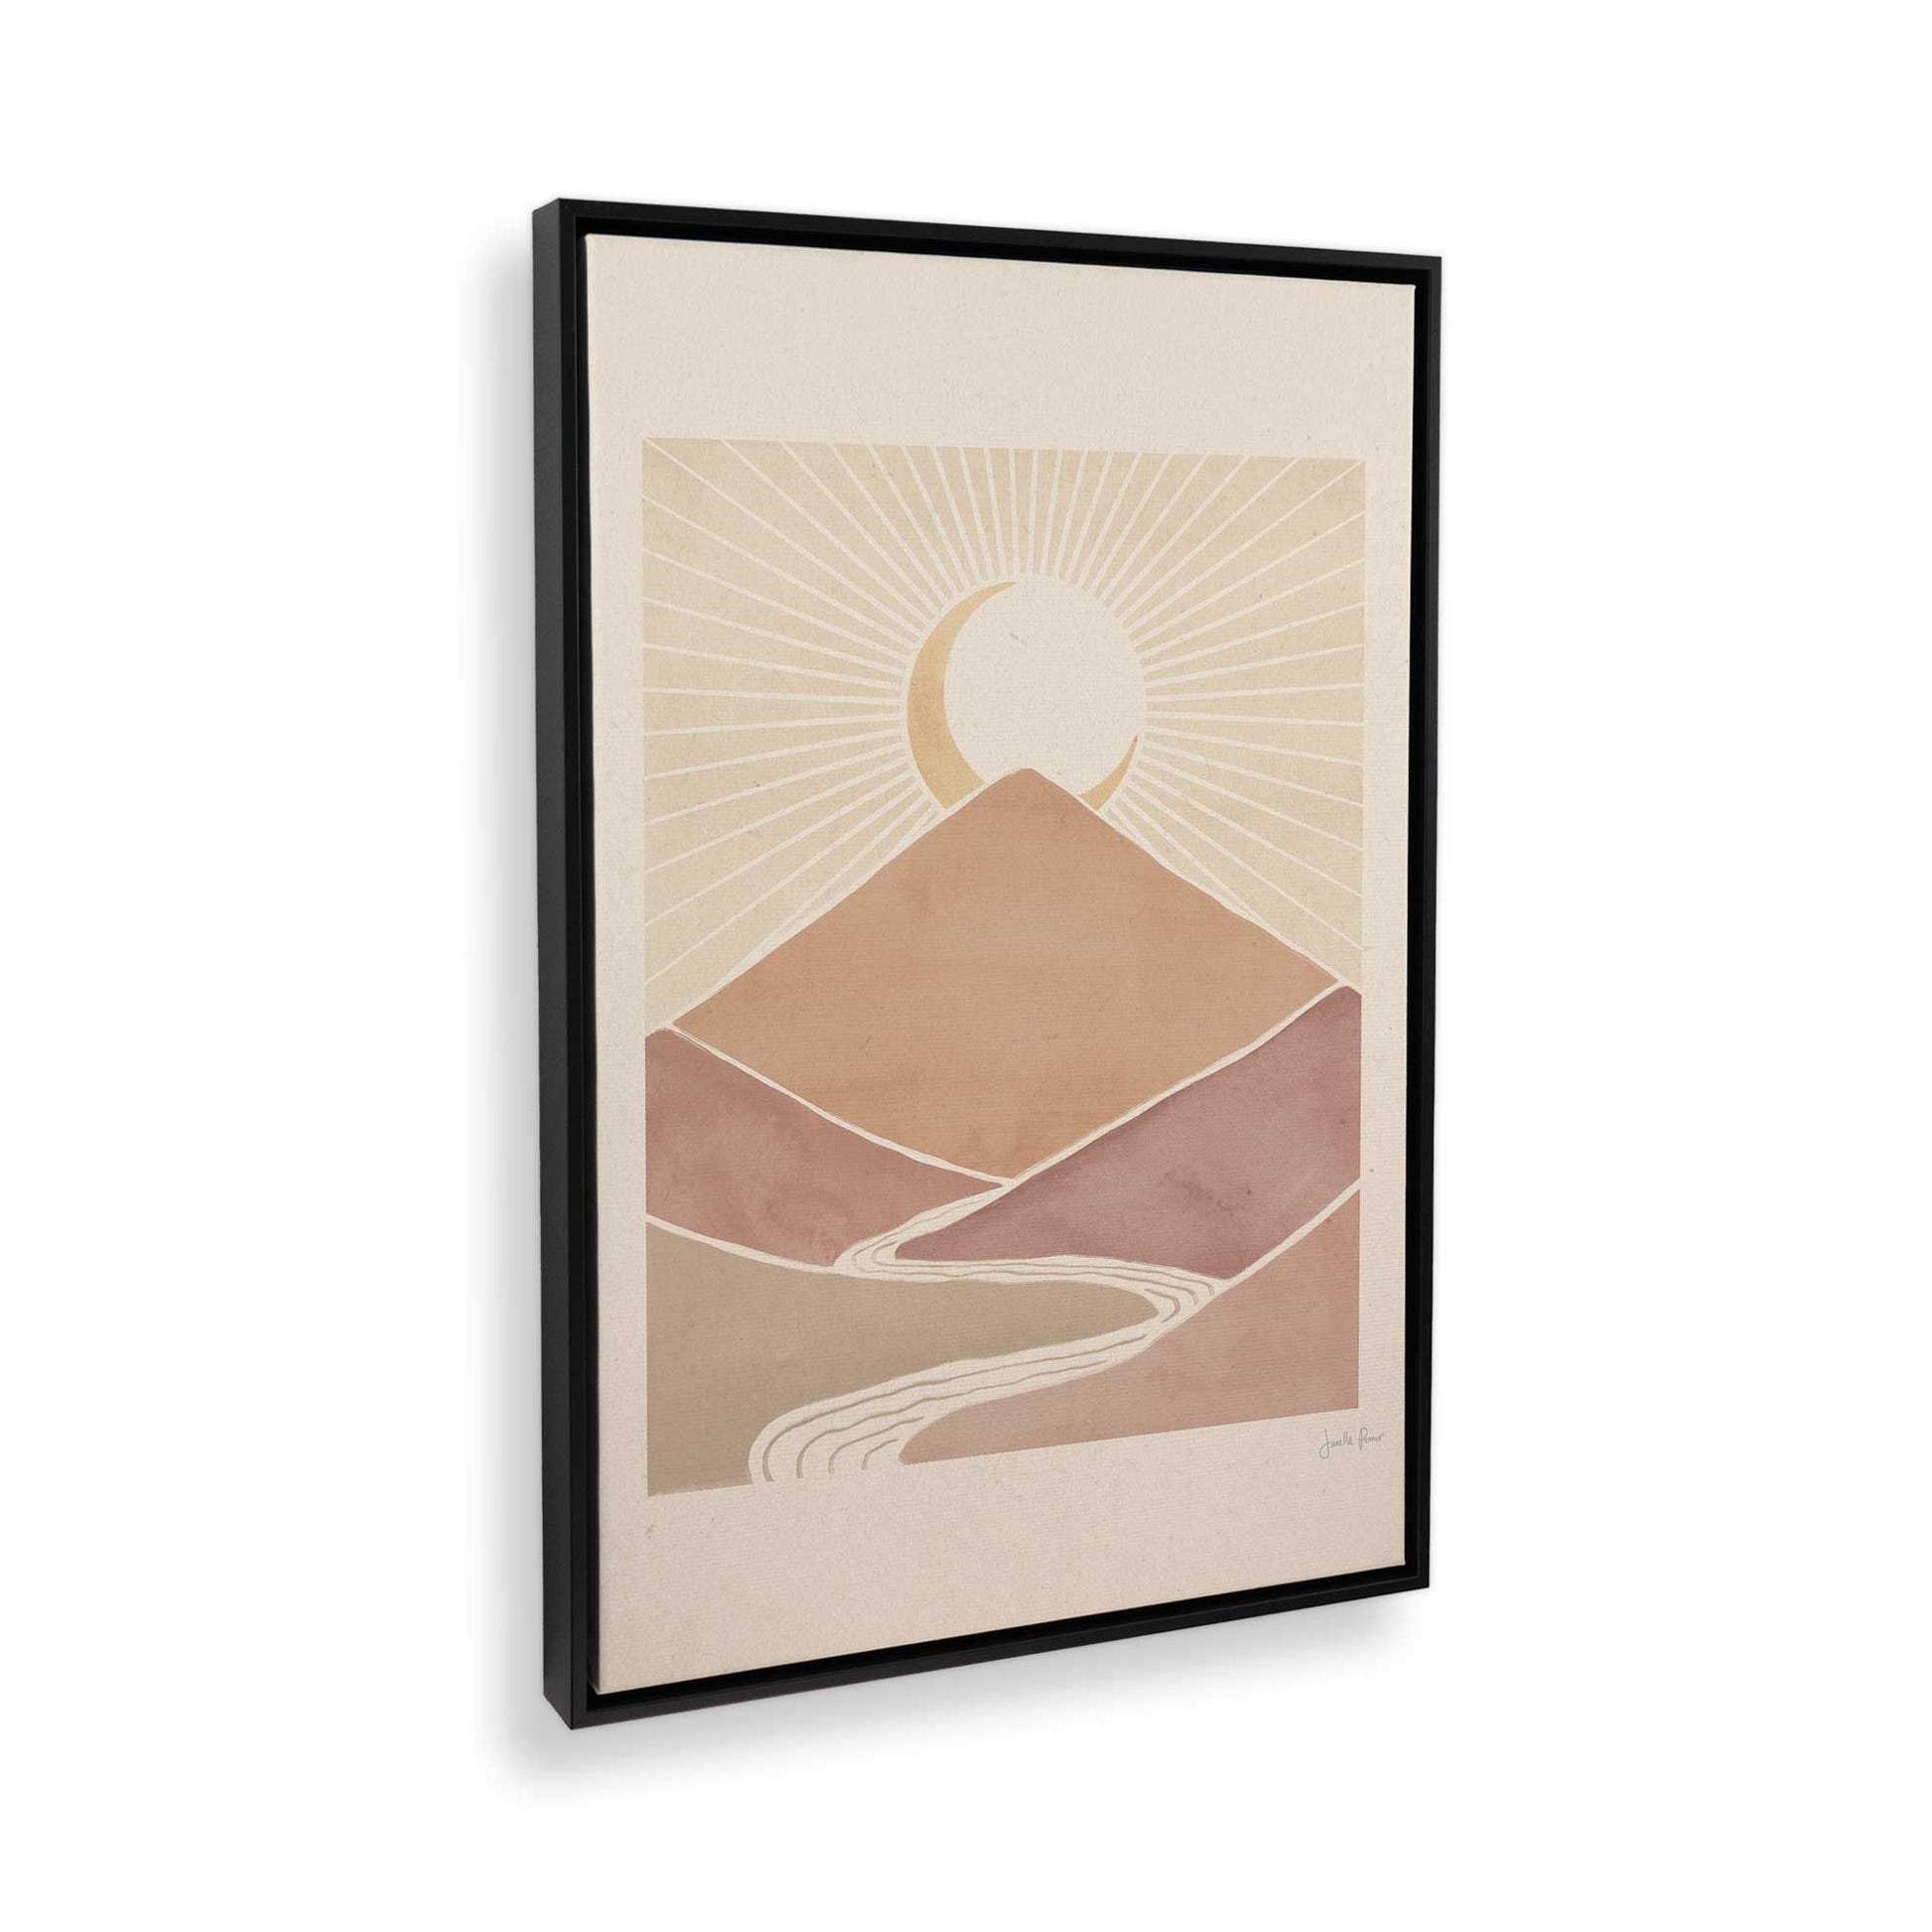 [Color:Satin Black] Picture of art in a Satin Black frame at an angle